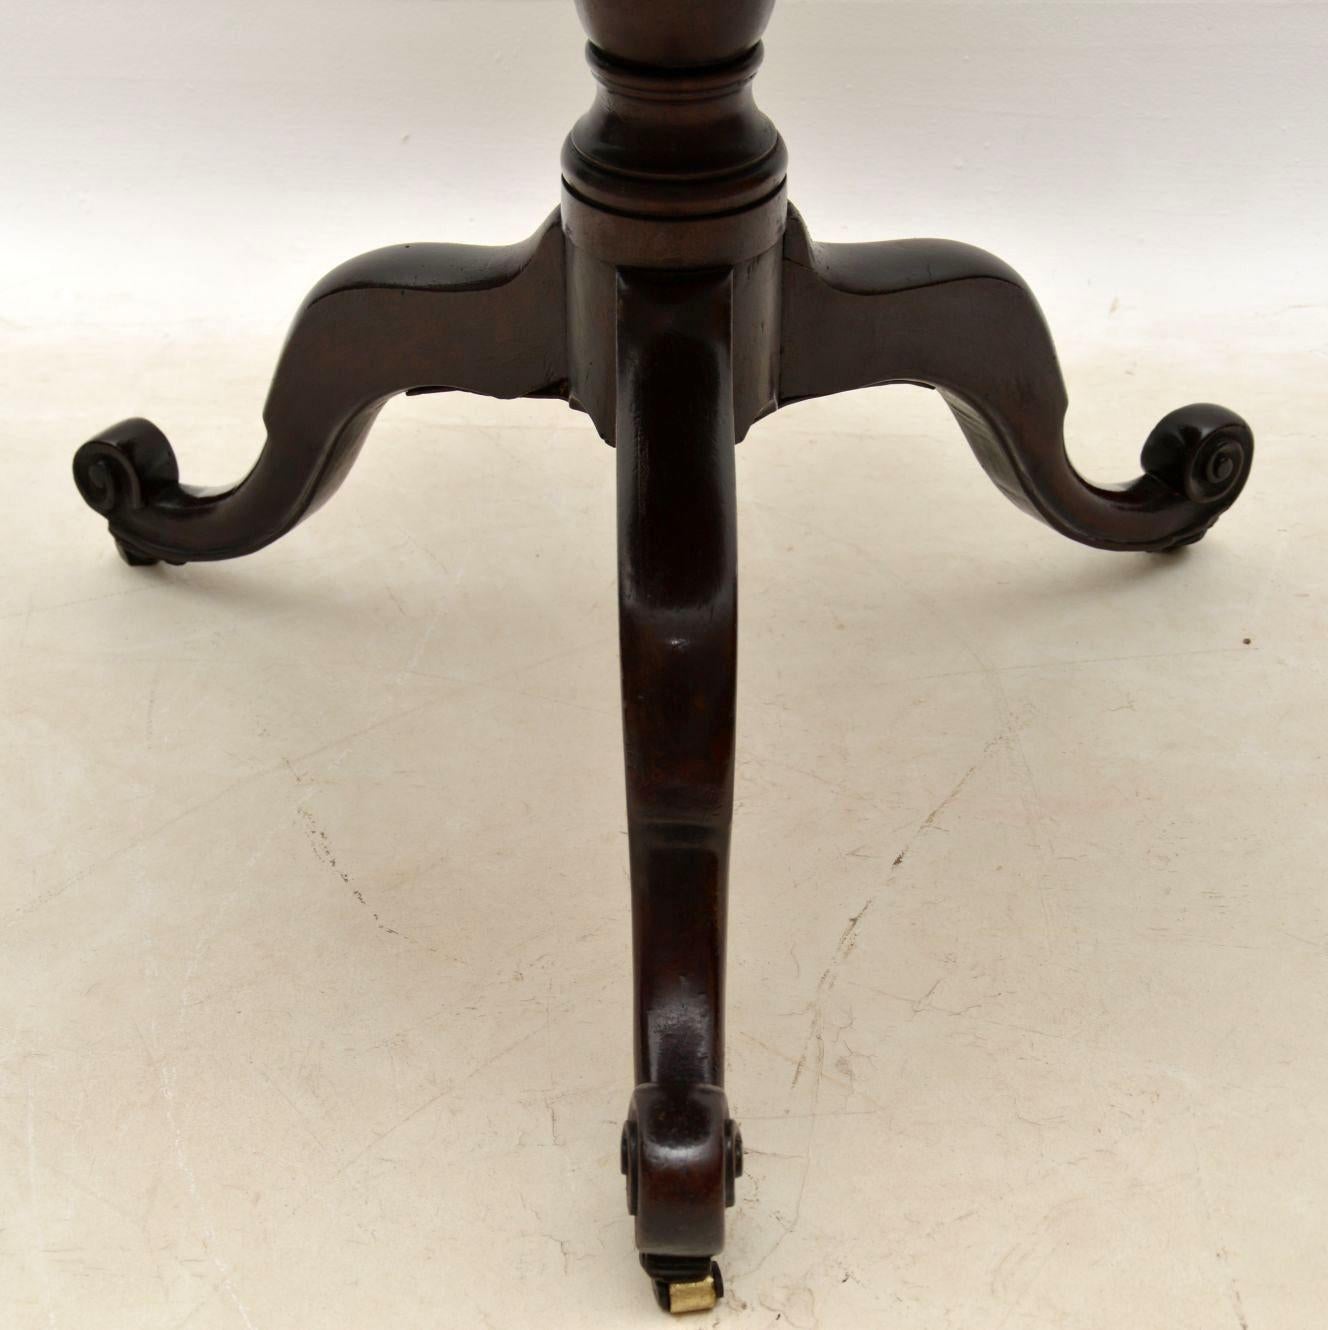 This is a fine quality antique period solid mahogany George III tripod based table in very good condition and dating to circa 1790 period or a bit earlier. It’s actually quite a useful size and could be used as a small dining table. The tripod legs